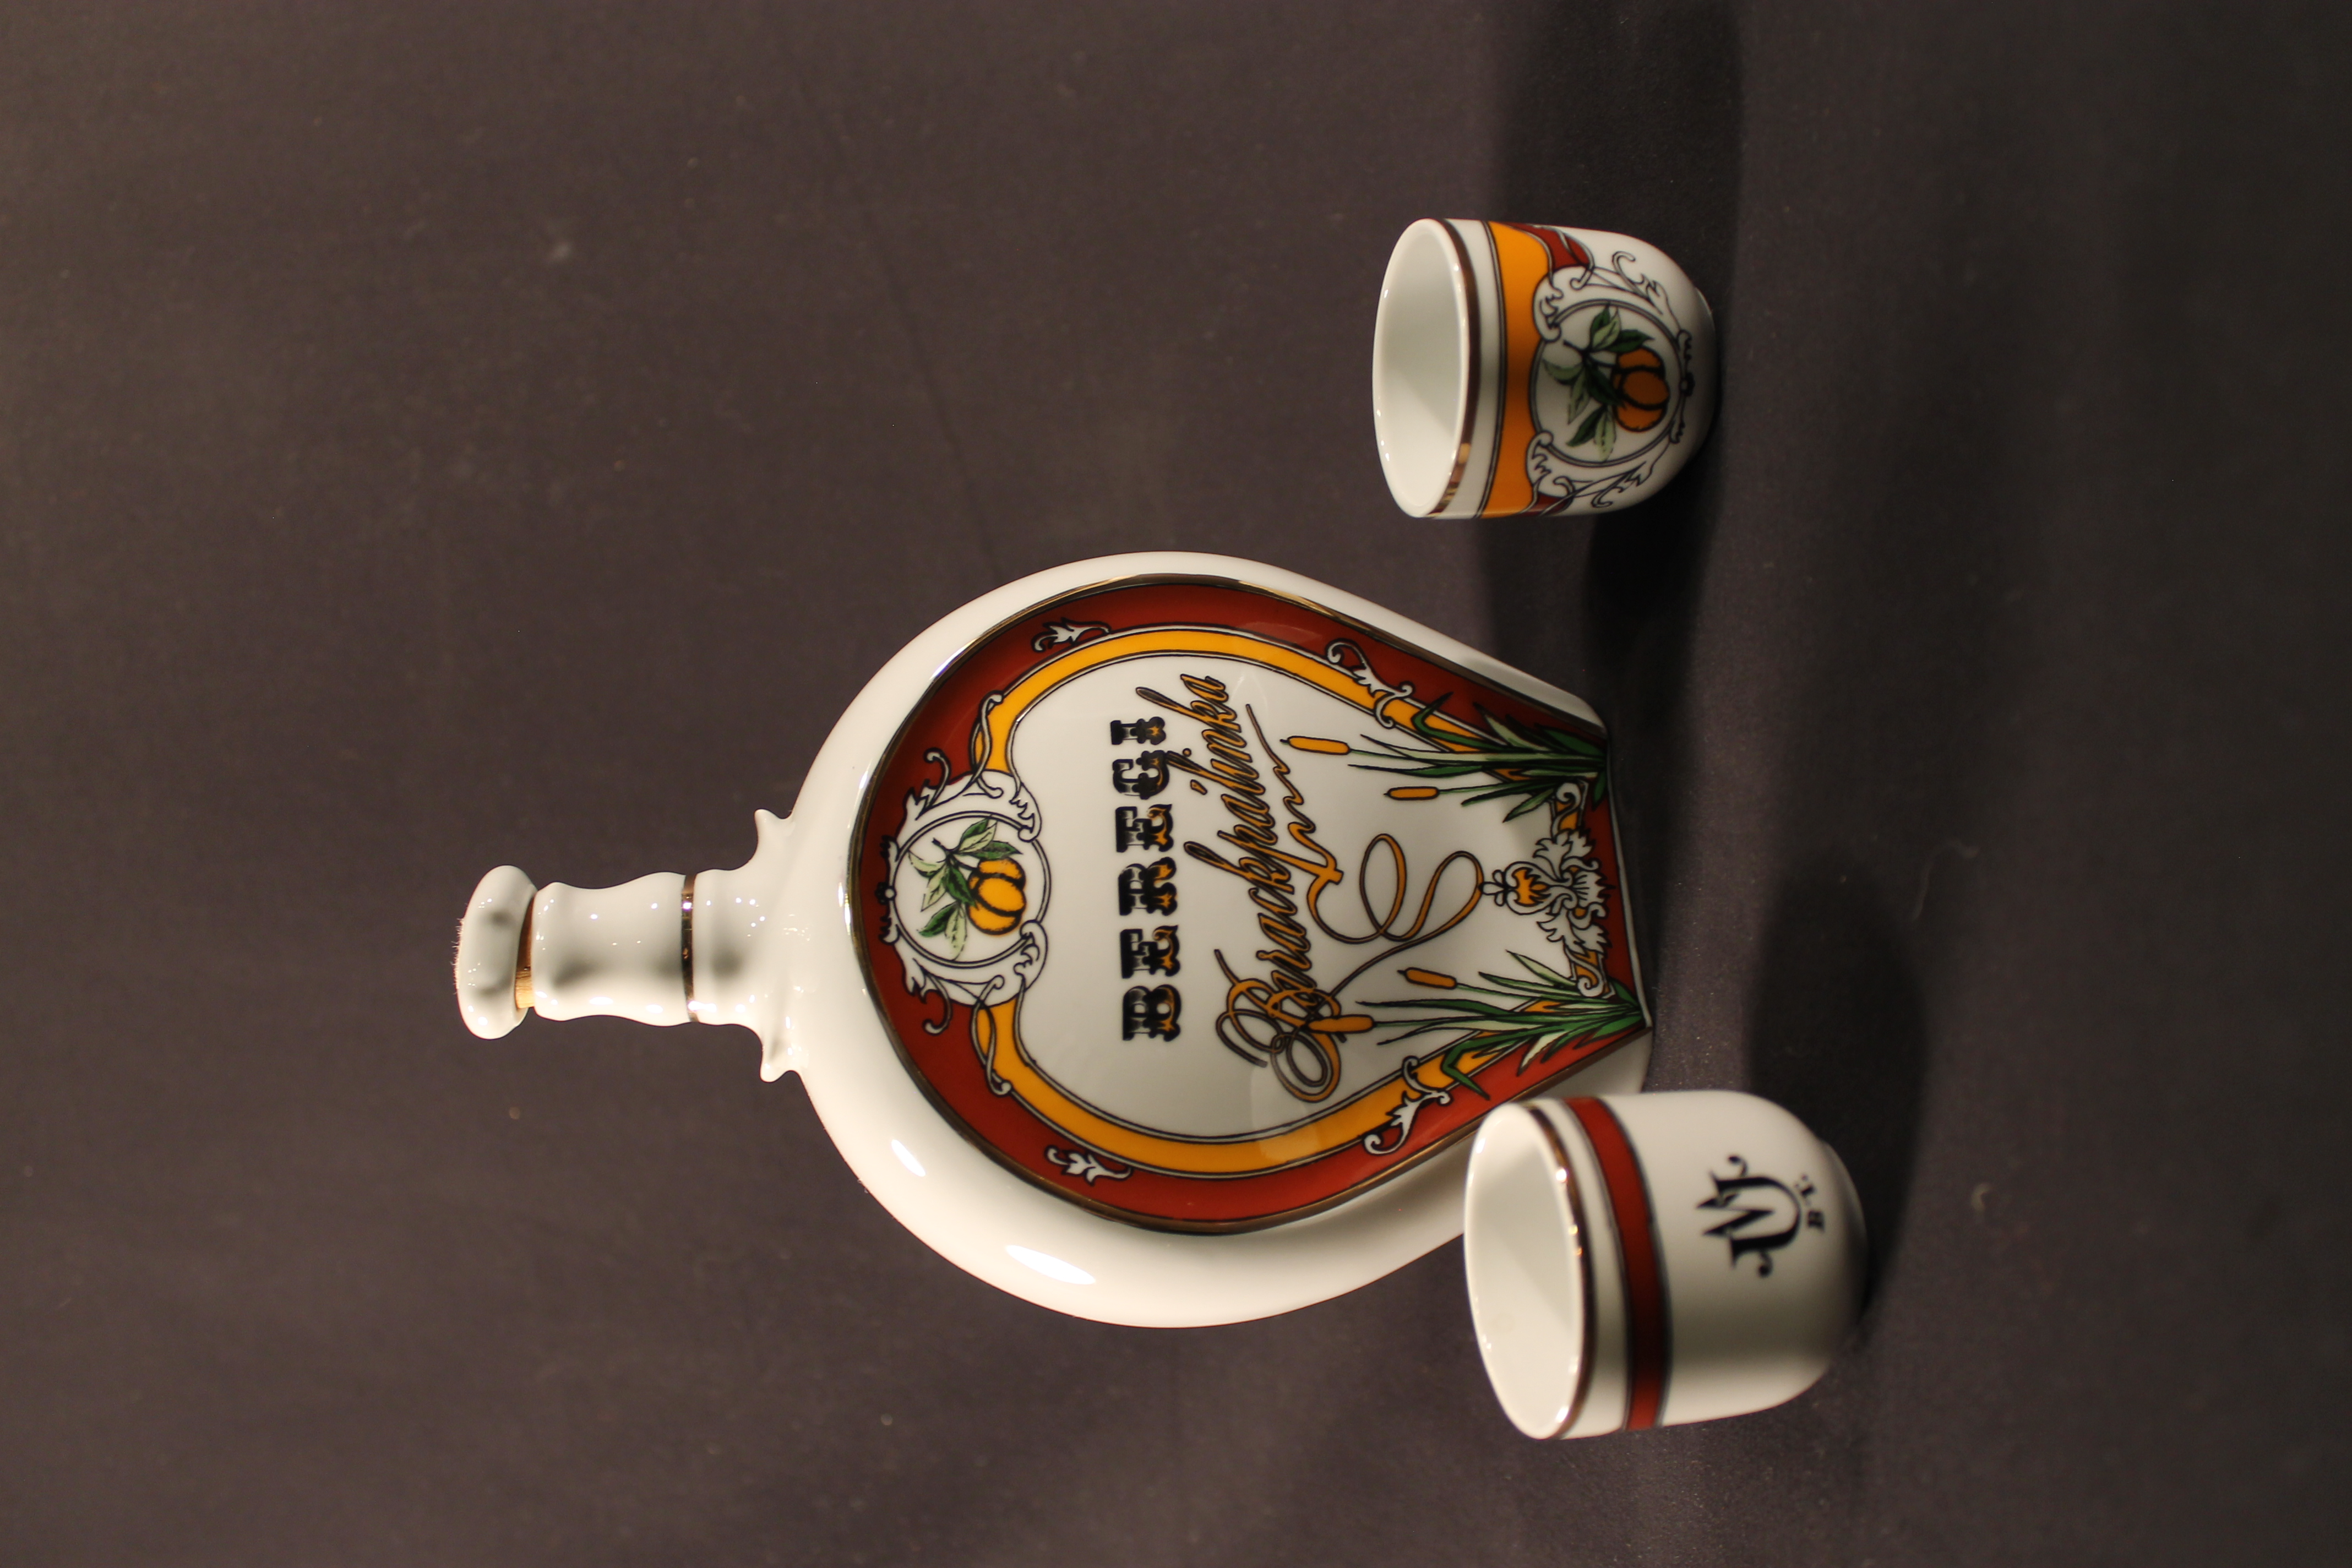 Beregi Palinka branded brandy decanter bottle with peaches on it. Two small glasses with the same peach design. 